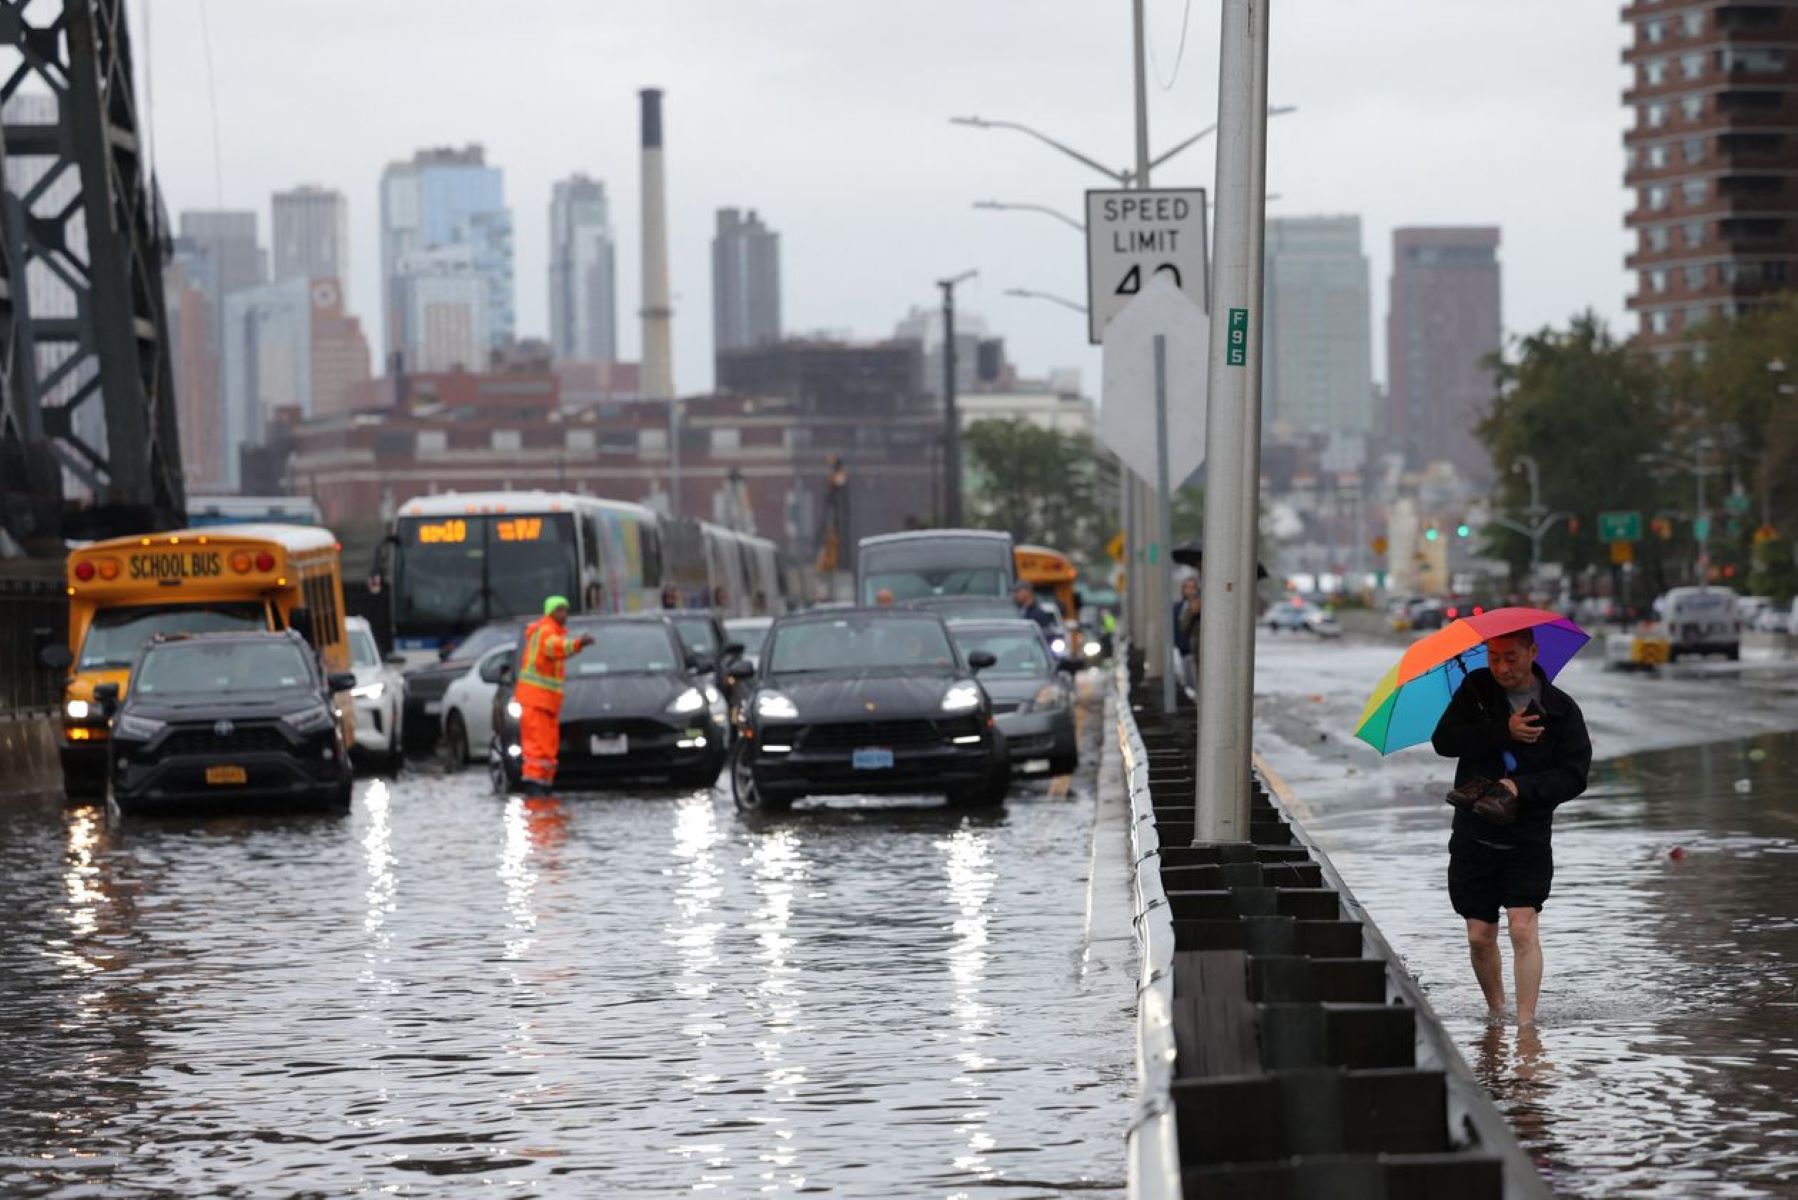 New York City Faces Severe Flooding Crisis: Streets Turn Into Dangerous Waterways